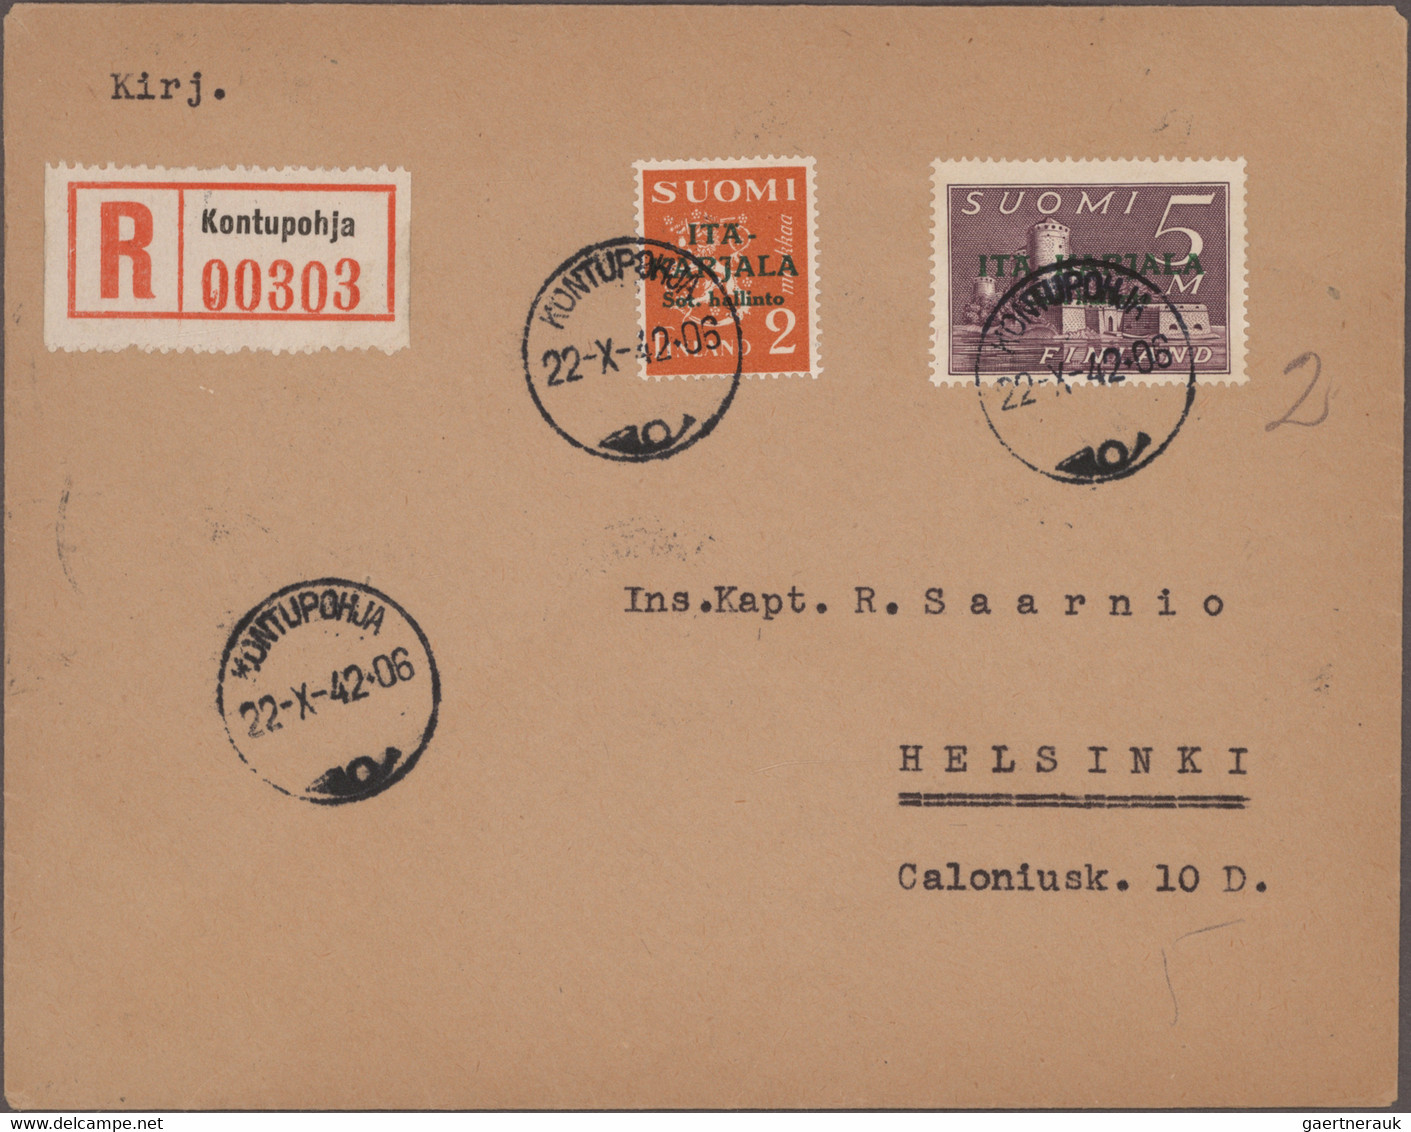 Finland: 1918-modern: More than 120 covers, postcards, picture postcards, FDC's